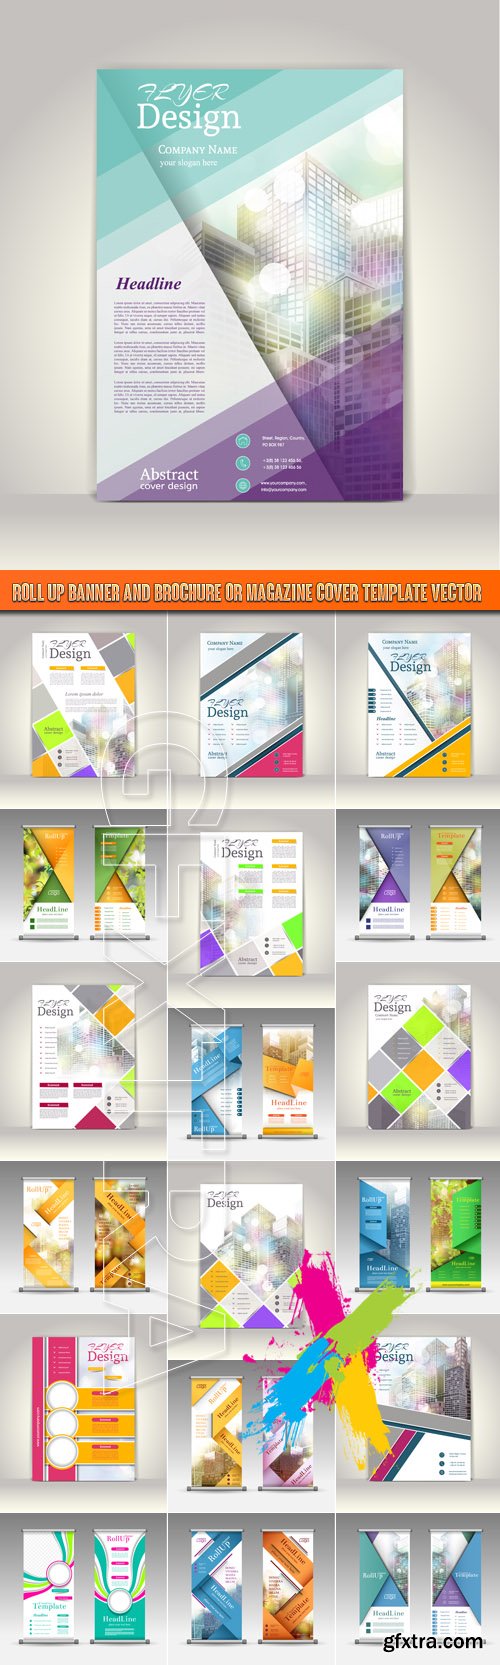 Roll up banner and brochure or magazine cover template vector